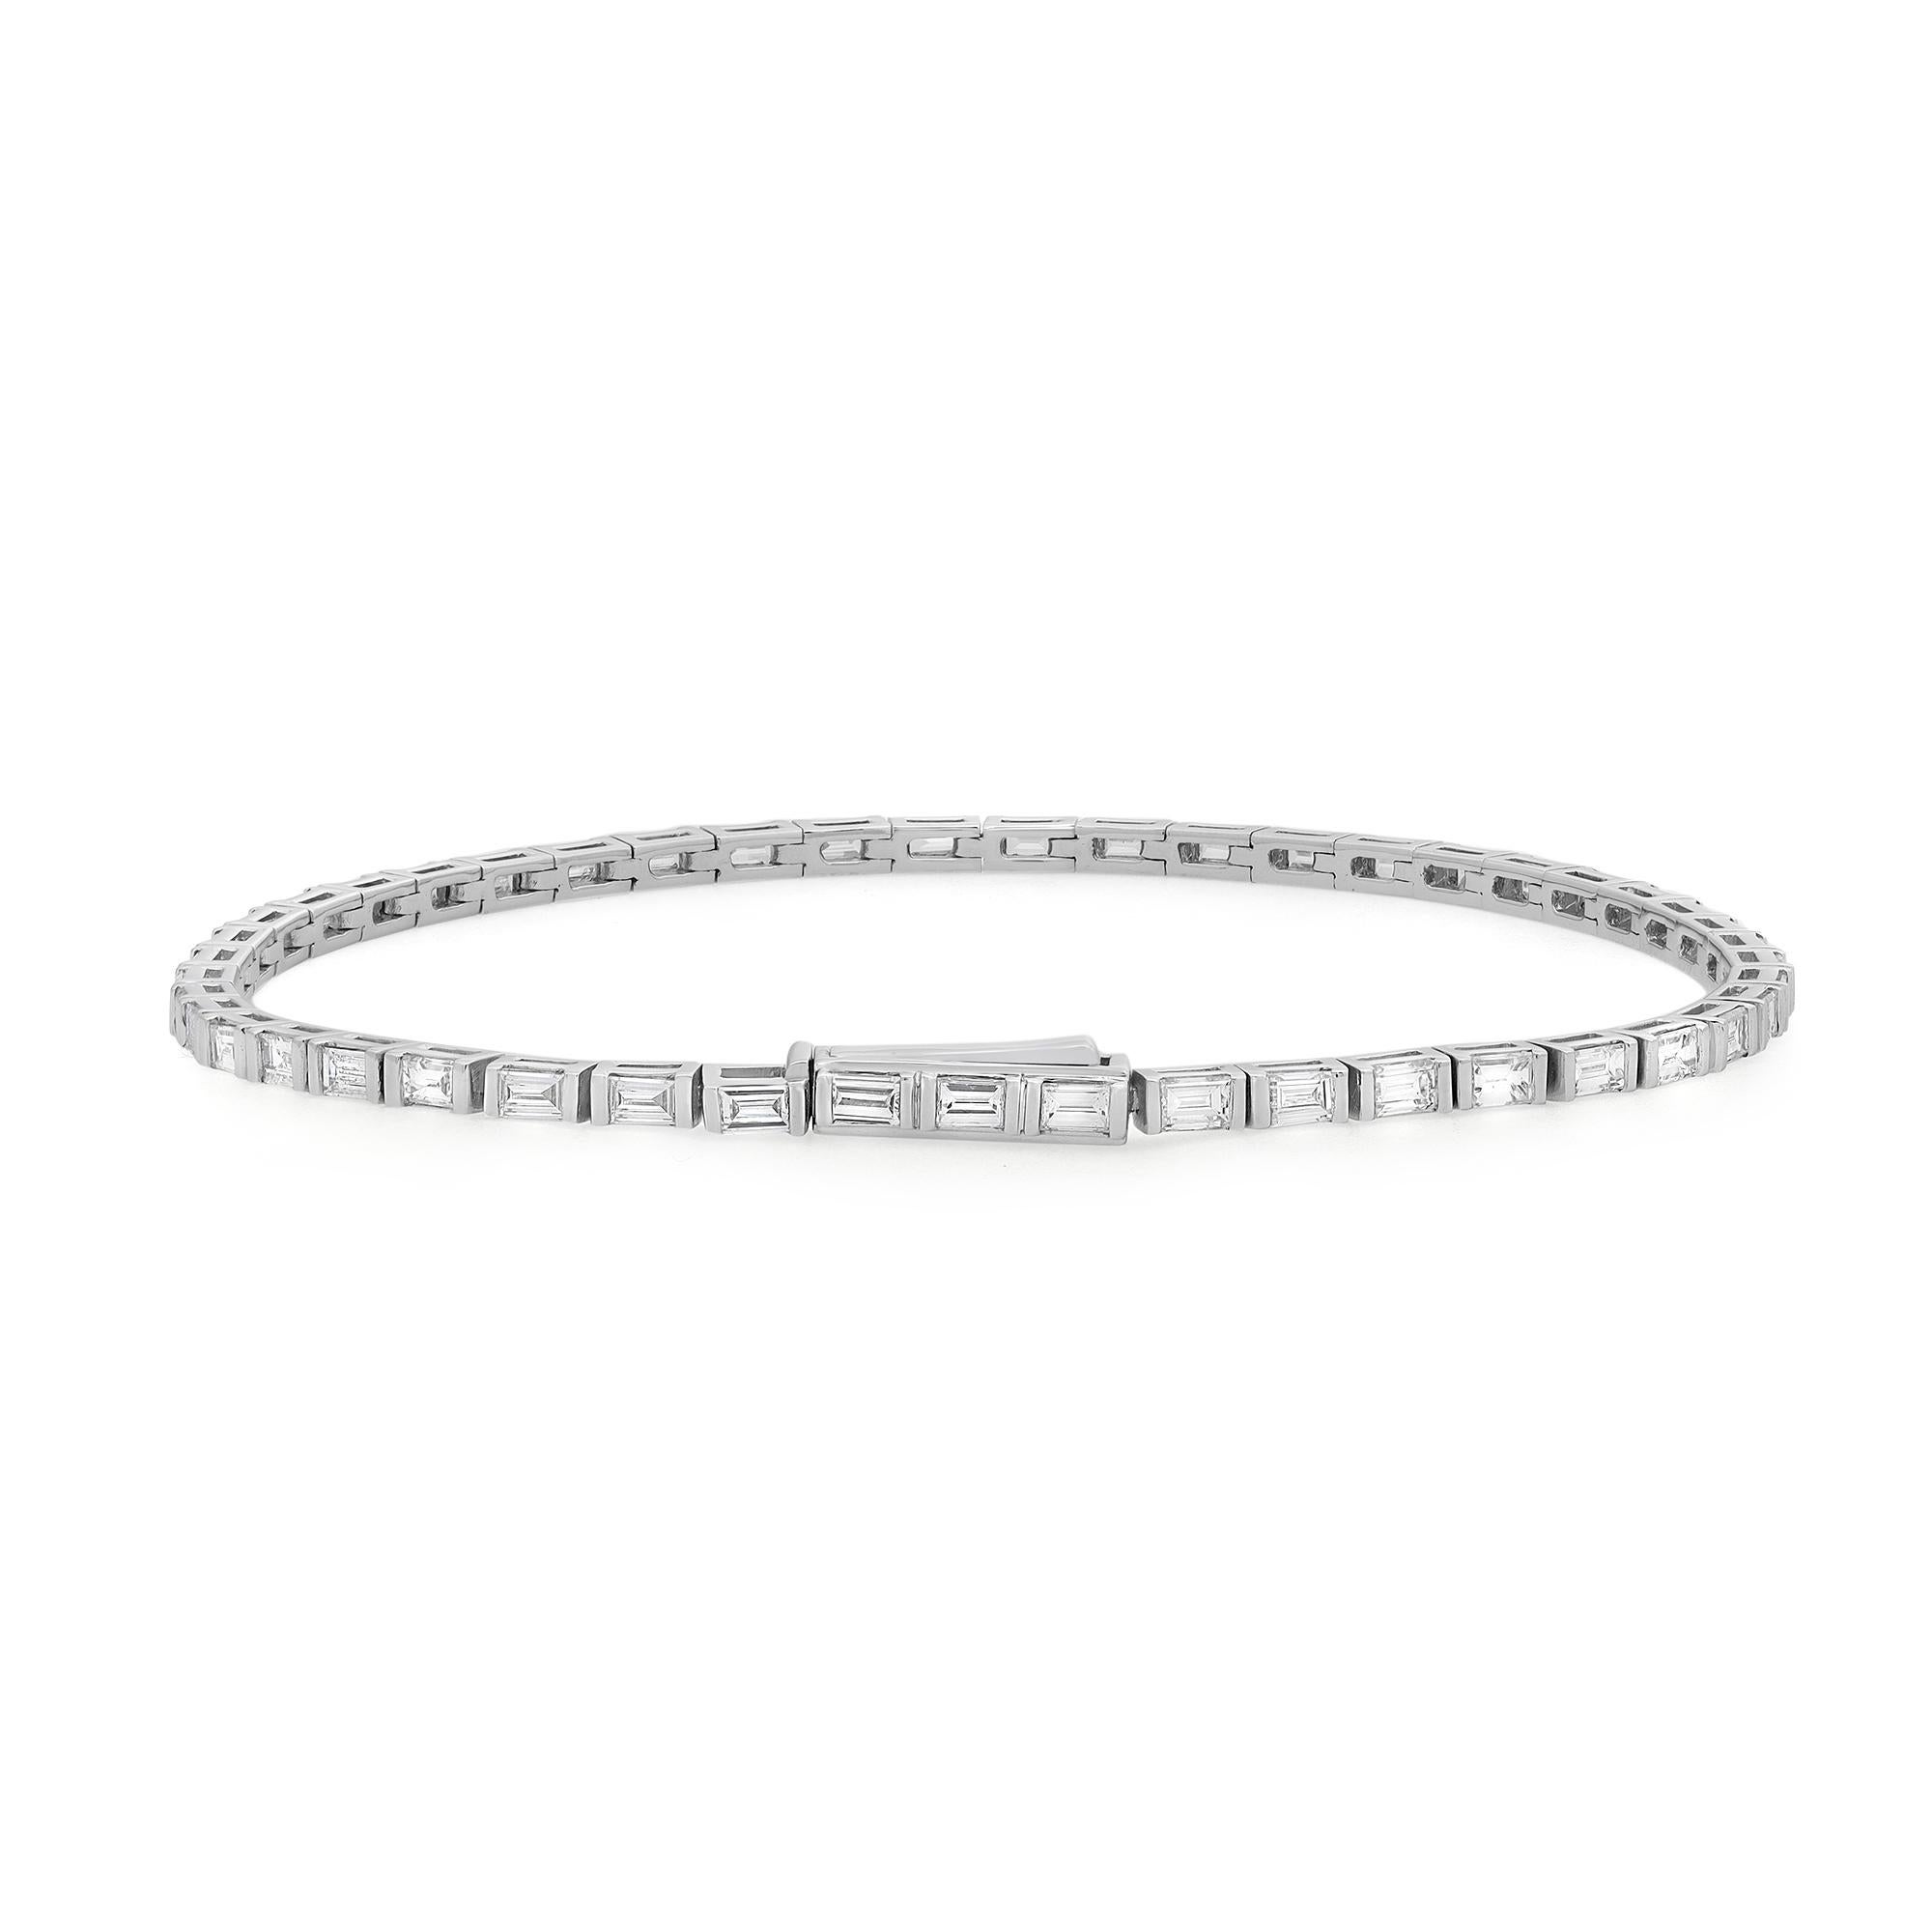 This exquisite Rachael Koen tennis bracelet features single lined baguette cut diamonds in half bezel setting style crafted in 18k white gold. Lightweight and super wearable, this handmade modern creation is a great addition to your jewelry